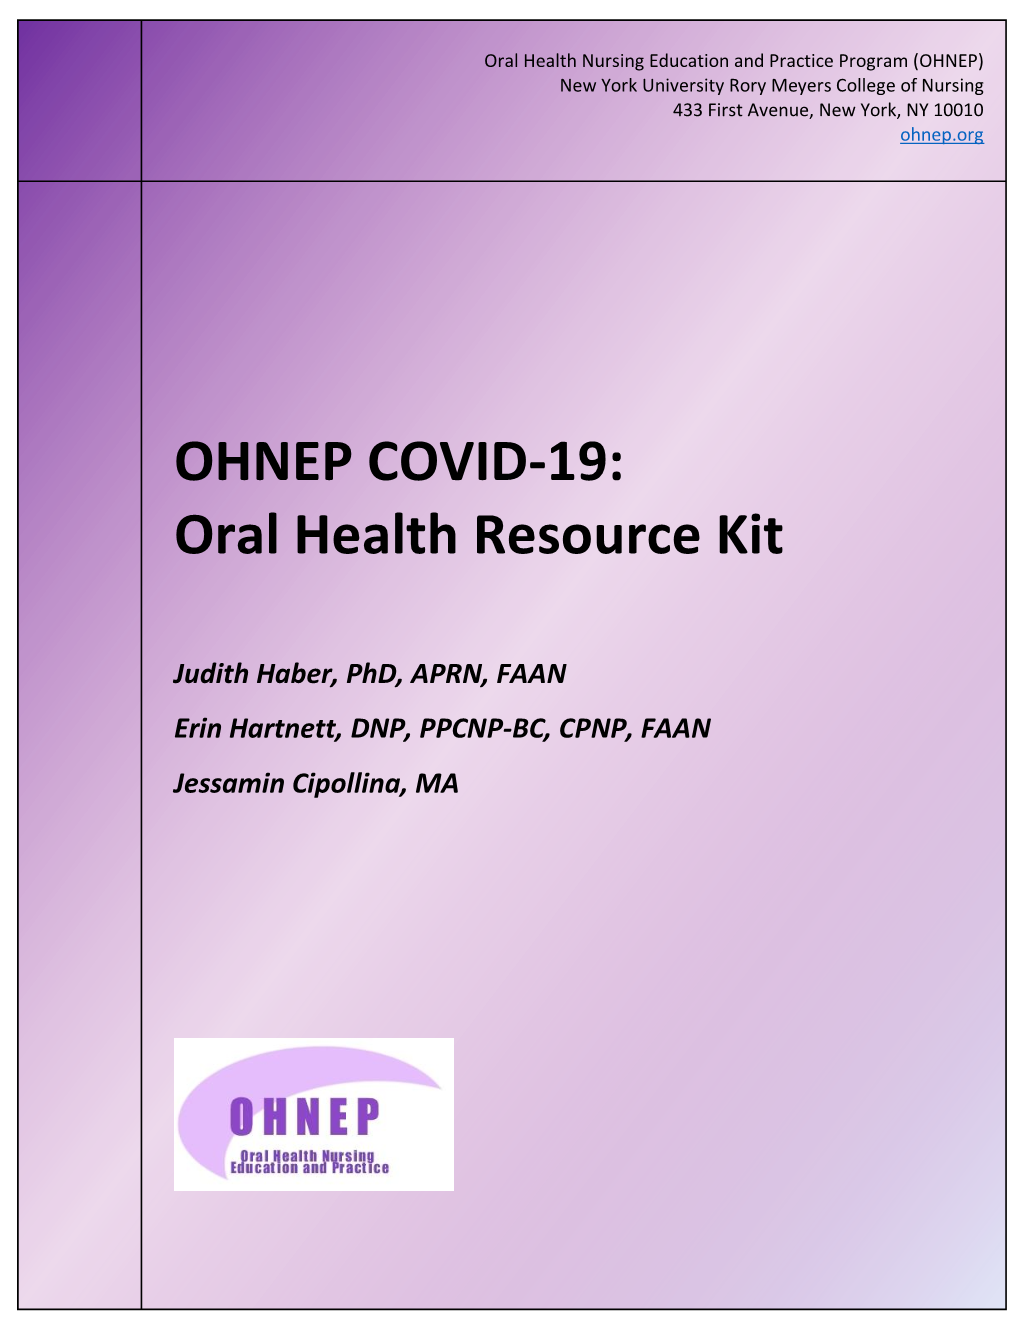 OHNEP COVID-19: Oral Health Resource Kit